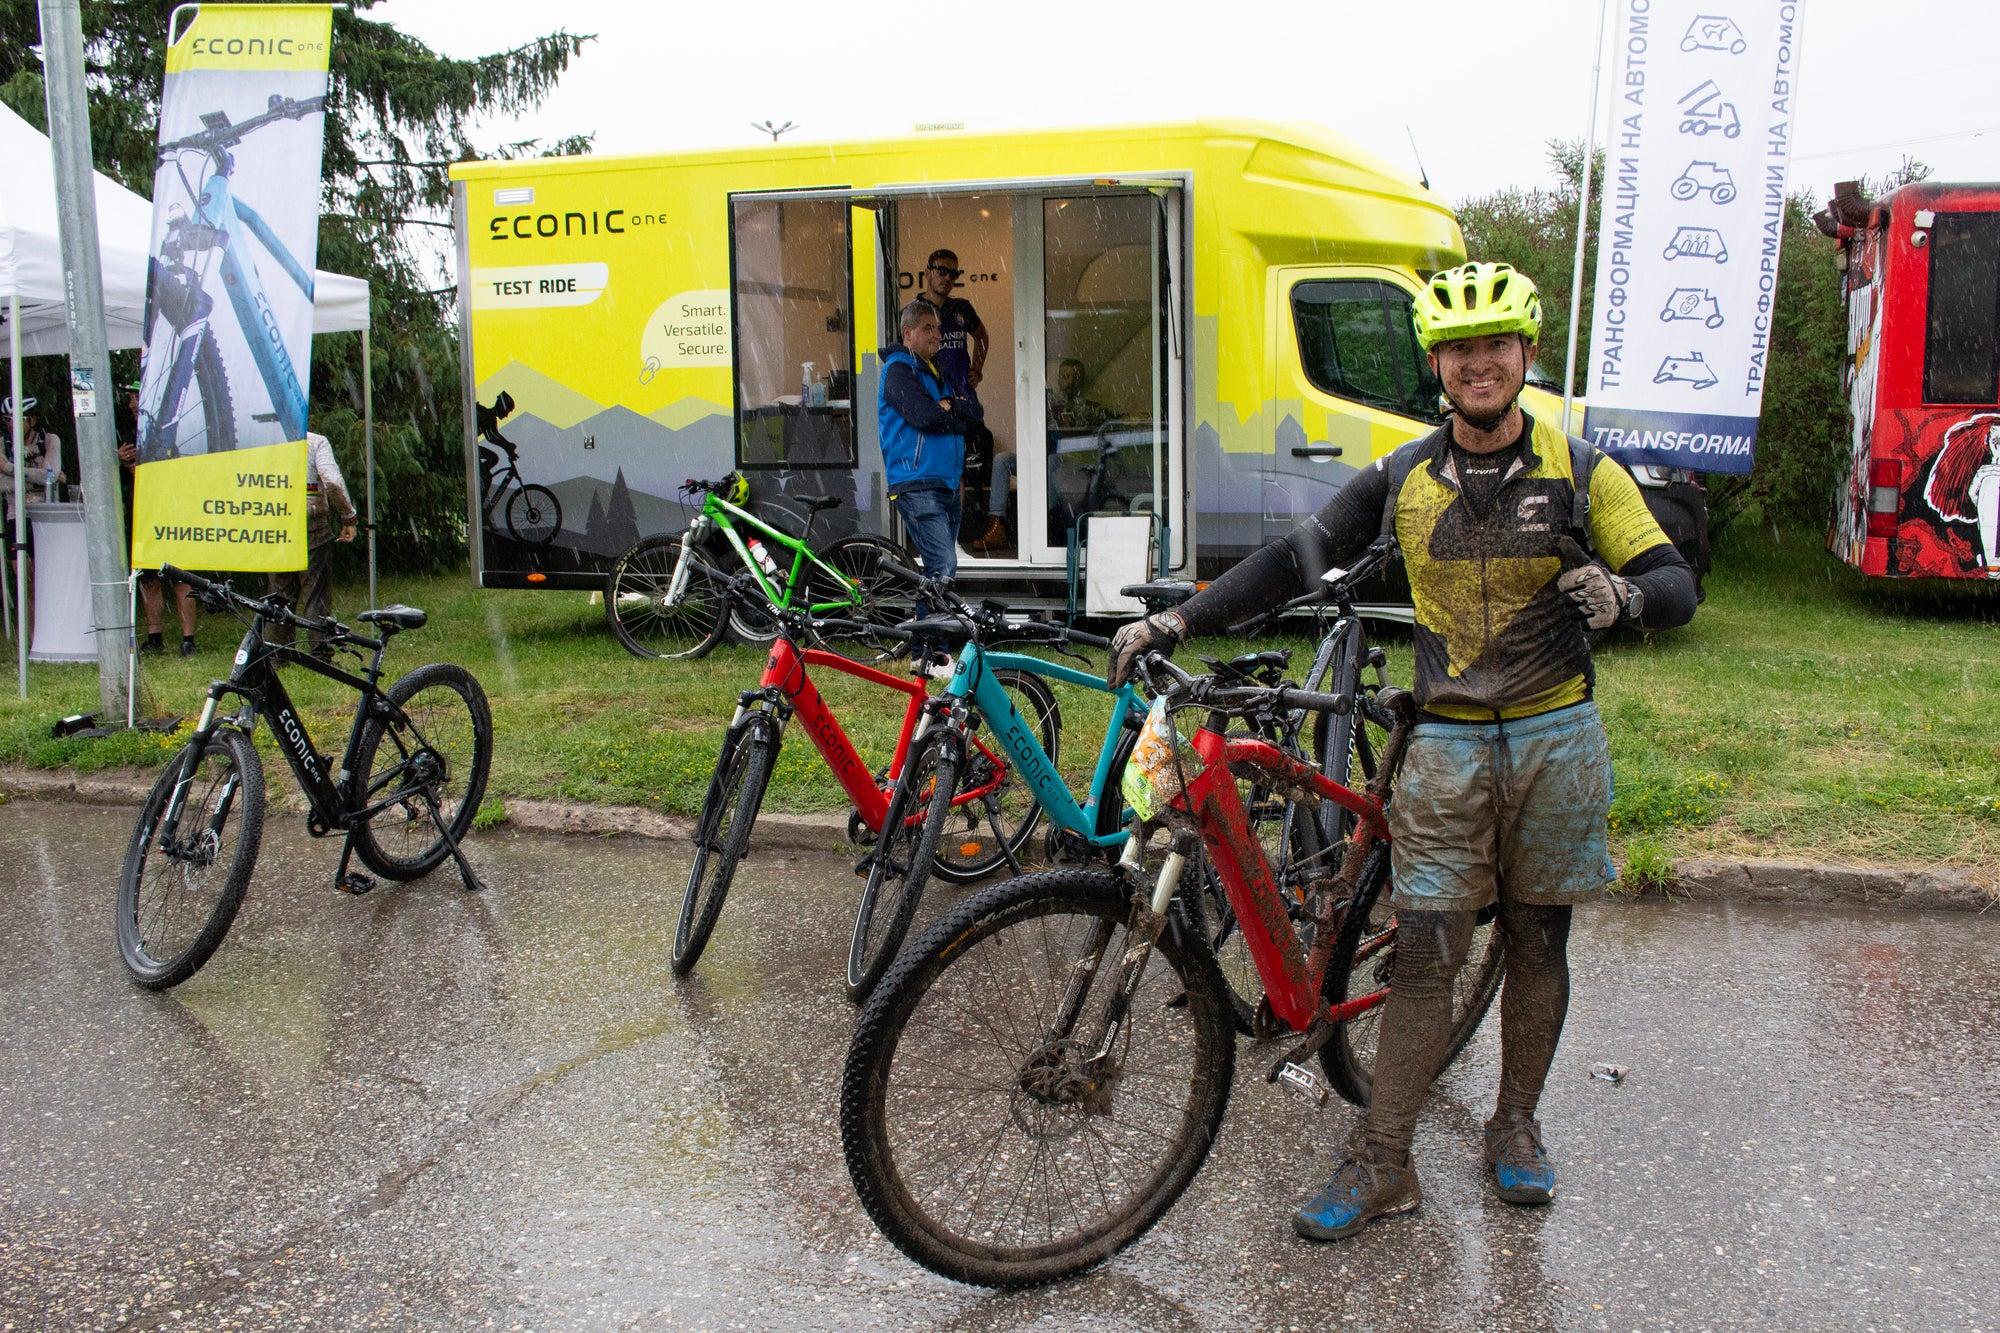 The Econic Experience: 100 km Race in the Wild, Pop-up Van Trills and One Medal